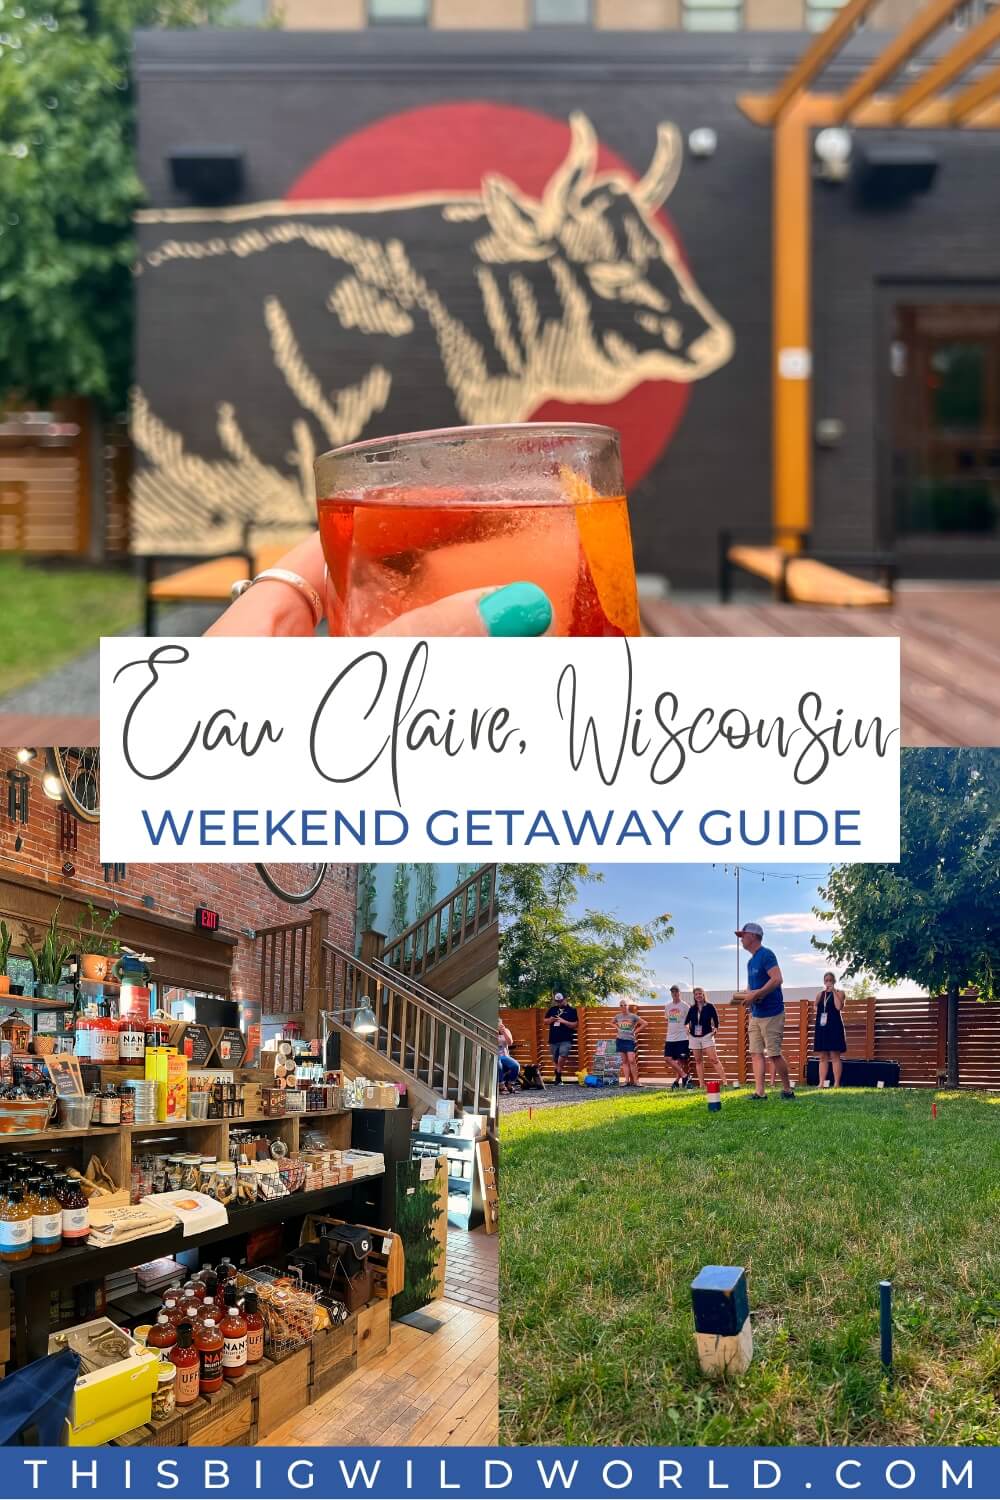 Text: Eau Claire Wisconsin Weekend Getaway Guide
Images: Cocktail in front of a mural, inside of a store, and people playing Kubb on a lawn.